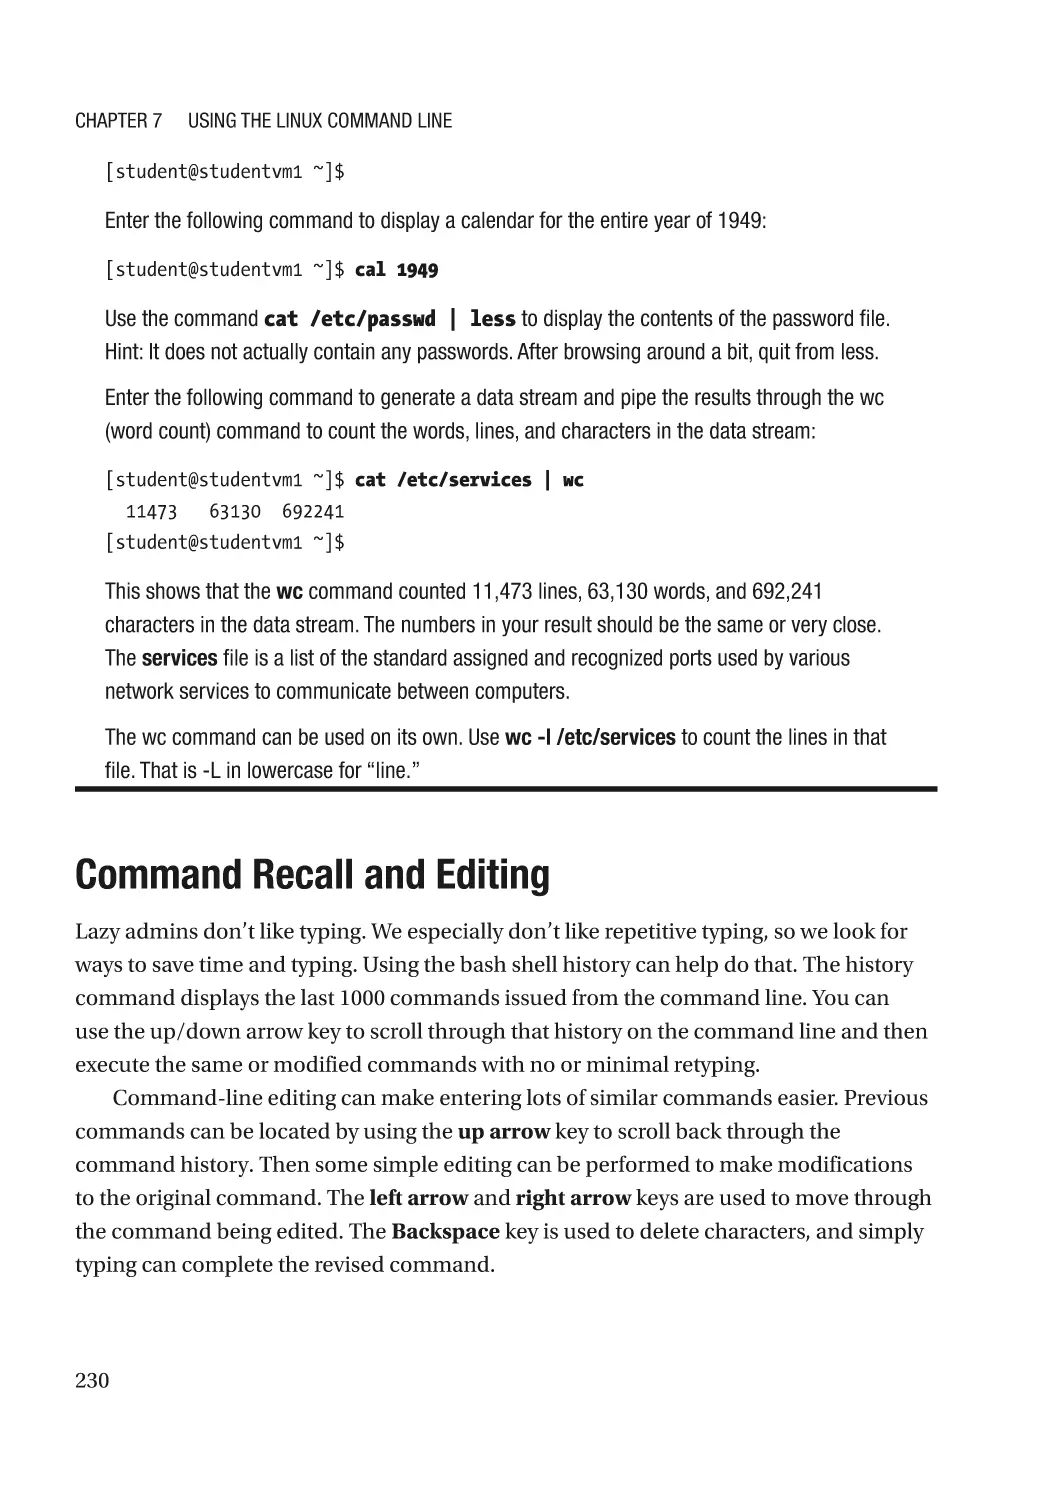 Command Recall and Editing